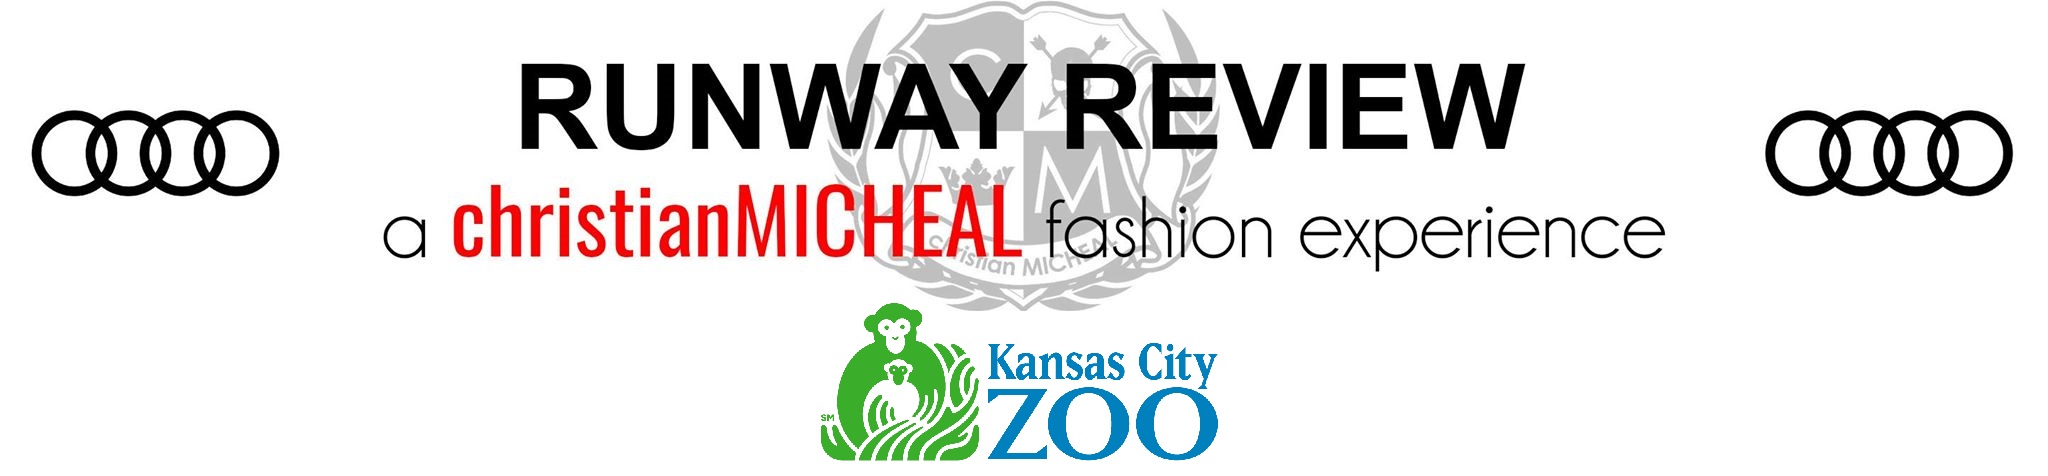 Runway Review KC | Home